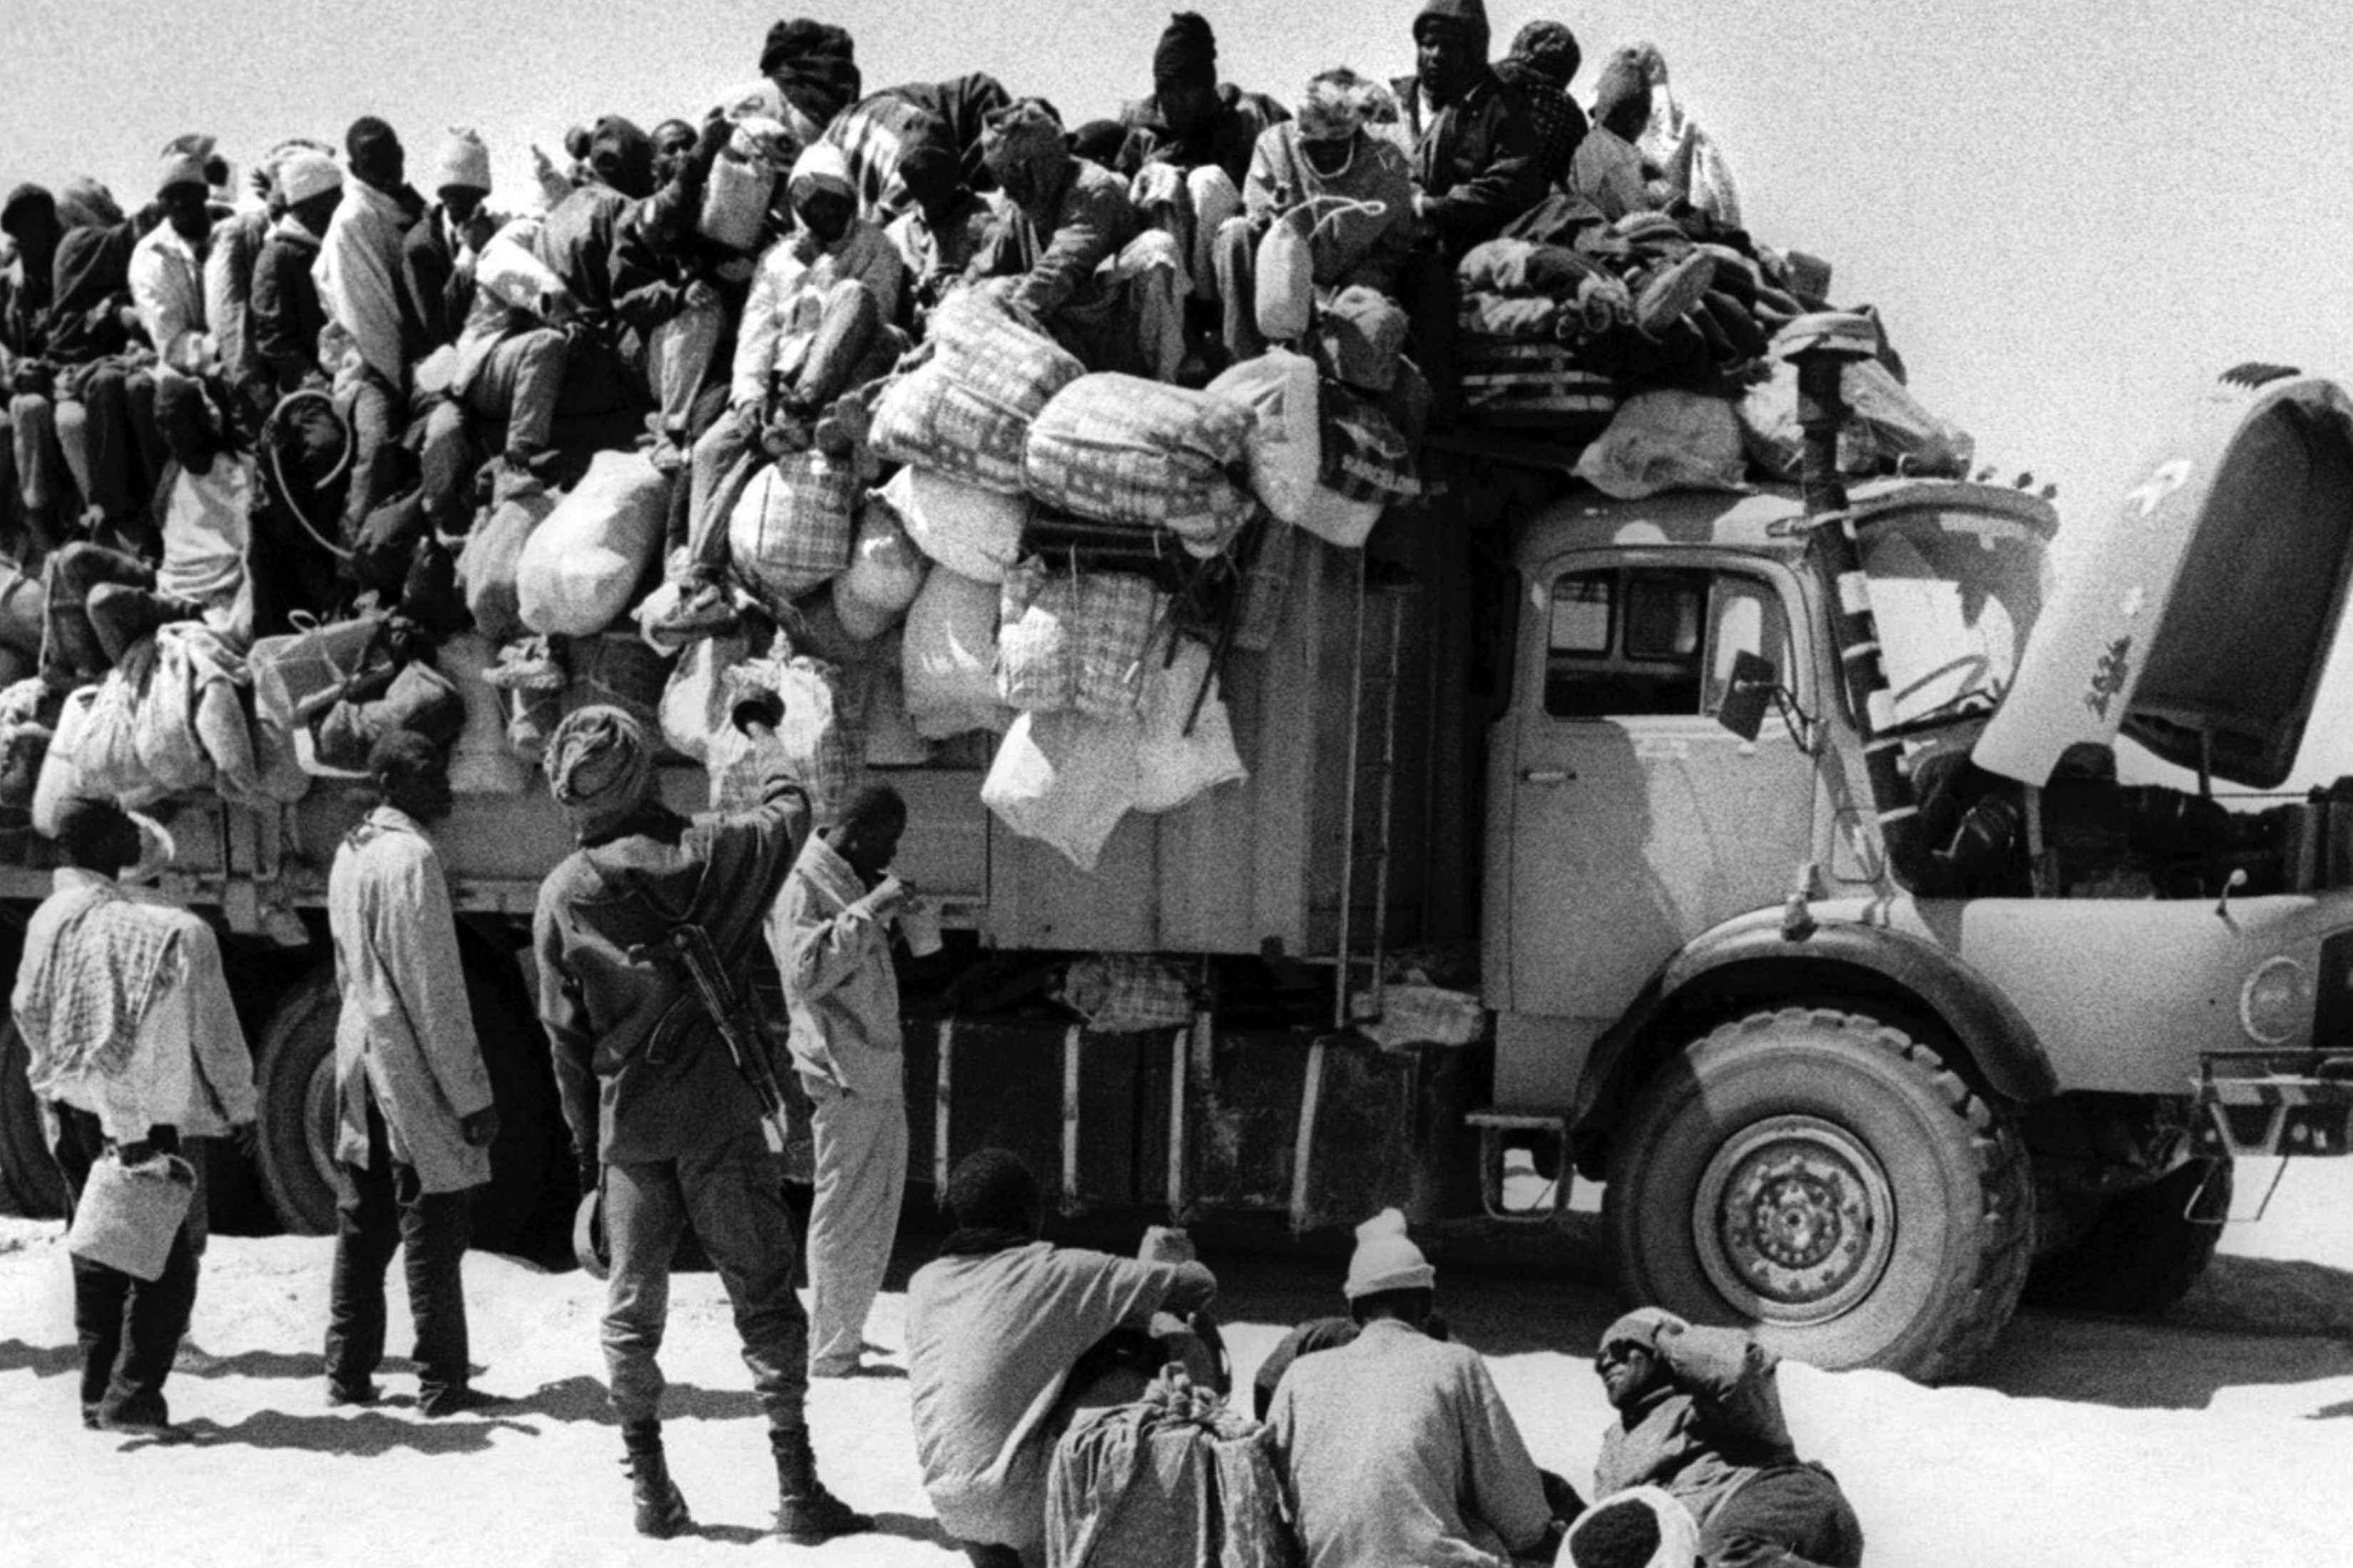 Workshop: Data on migrant smuggling and financing in West and North Africa